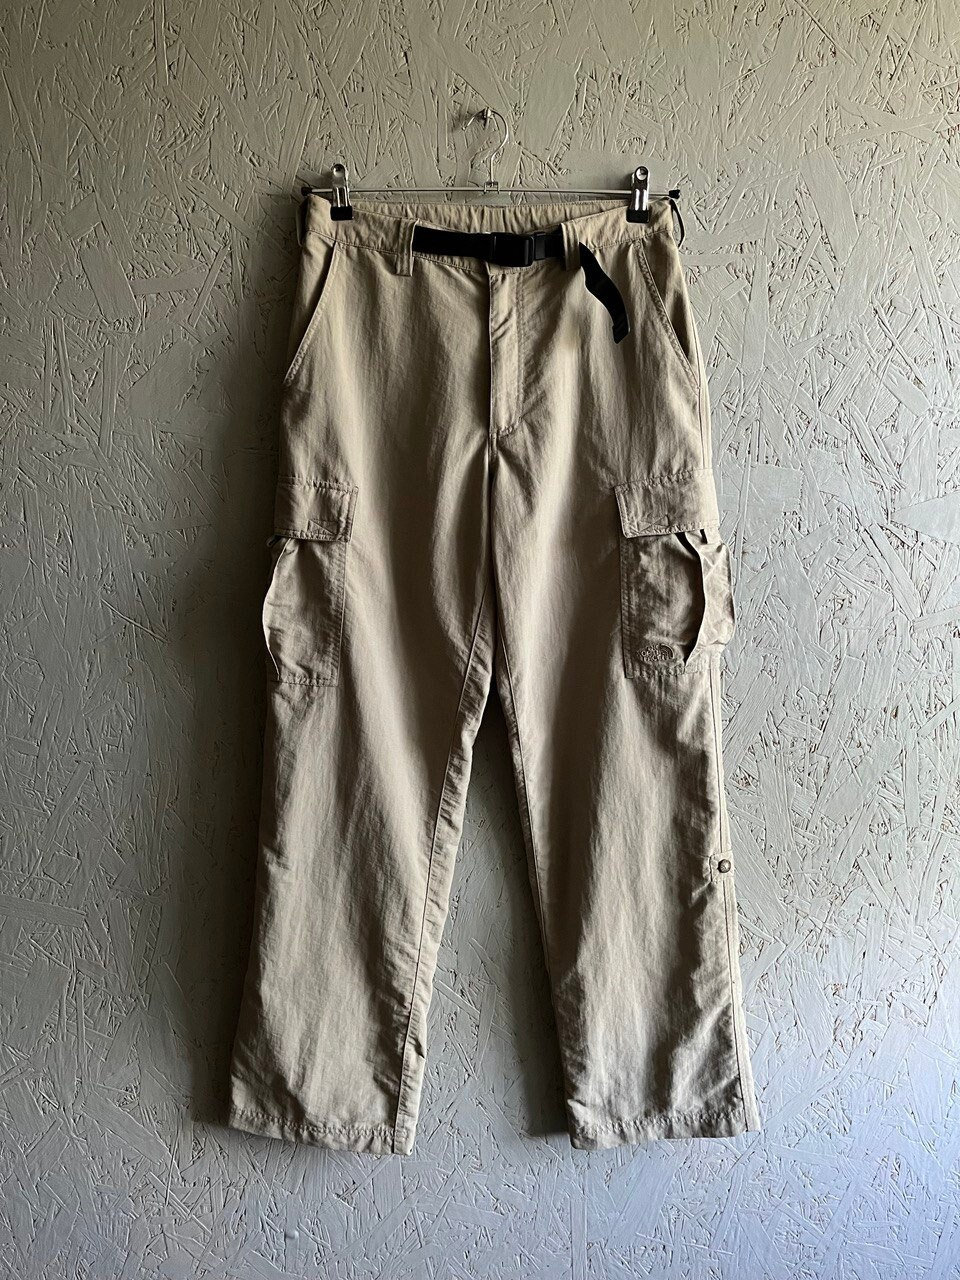 The North Face Womens Size M Belted Nylon Cargo Hiking Pants Stow